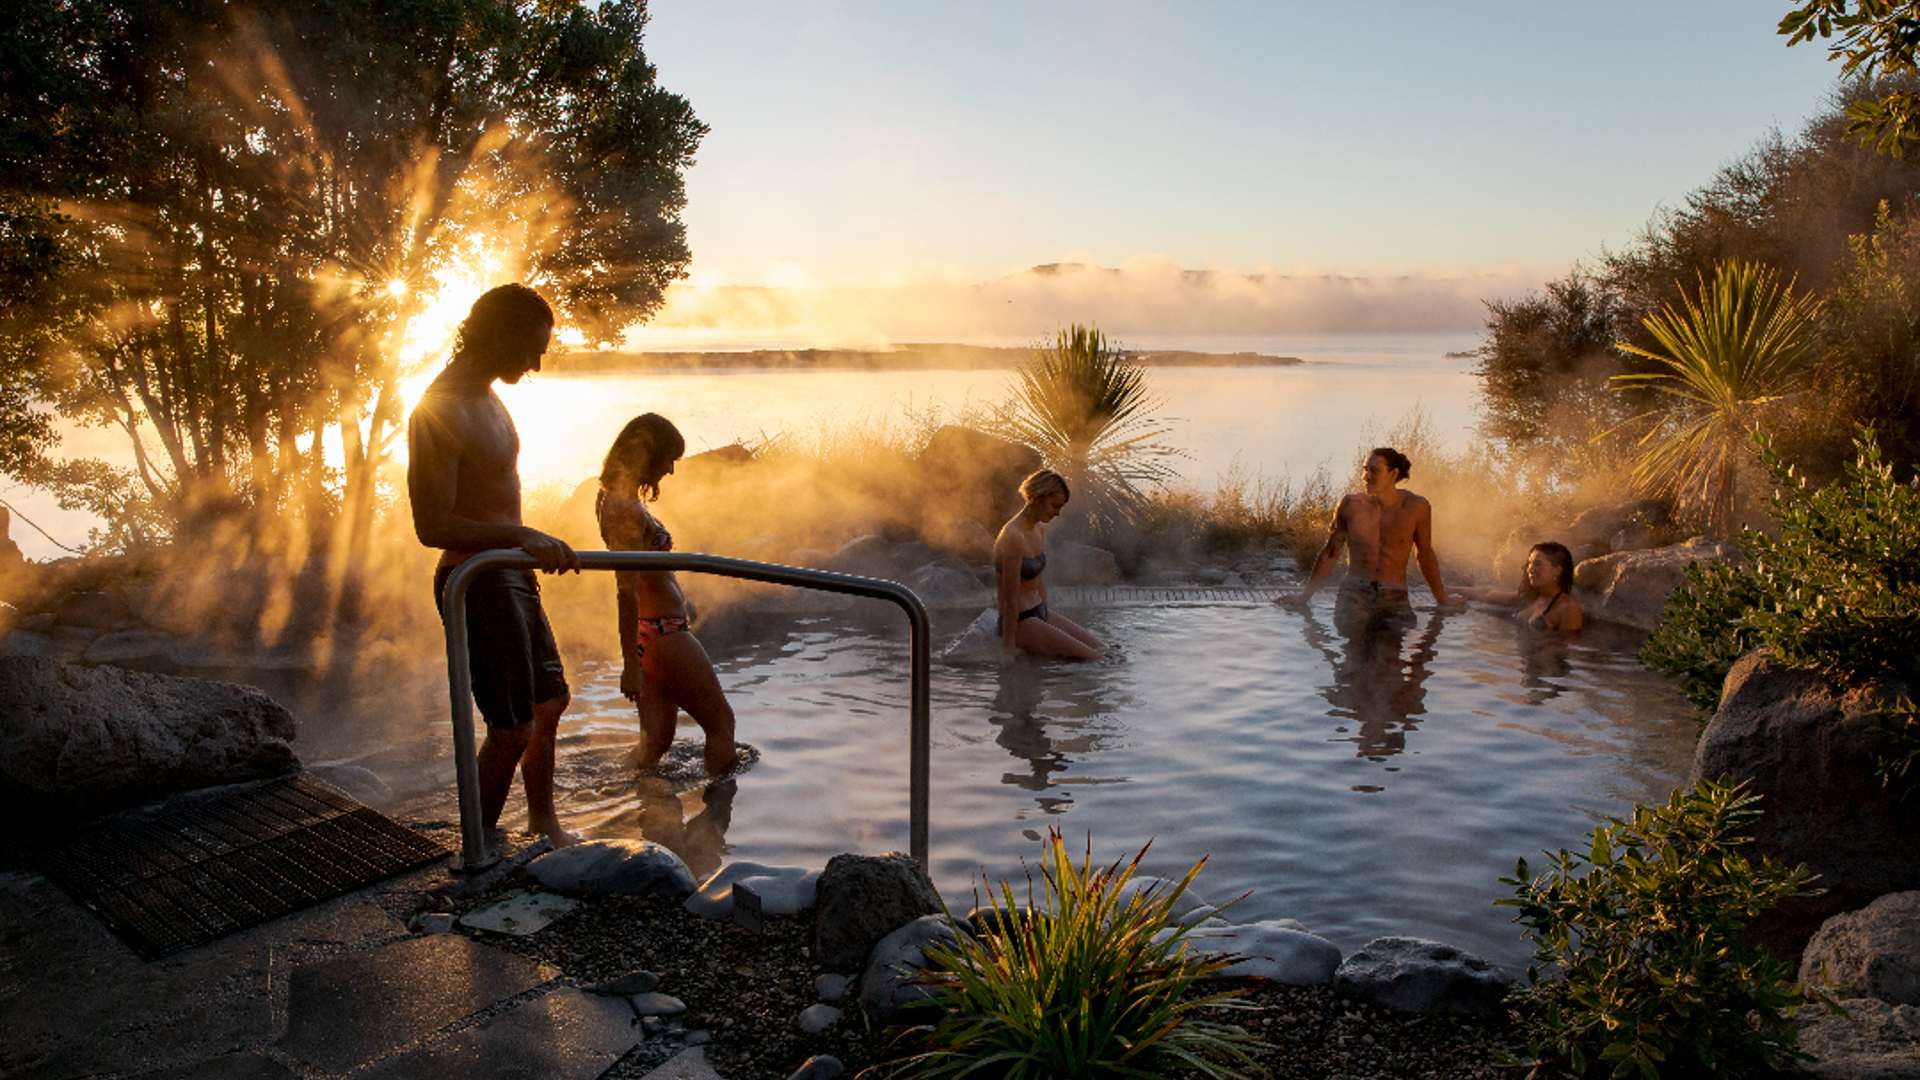 A Weekender's Guide to Rotorua in New Zealand's North Island